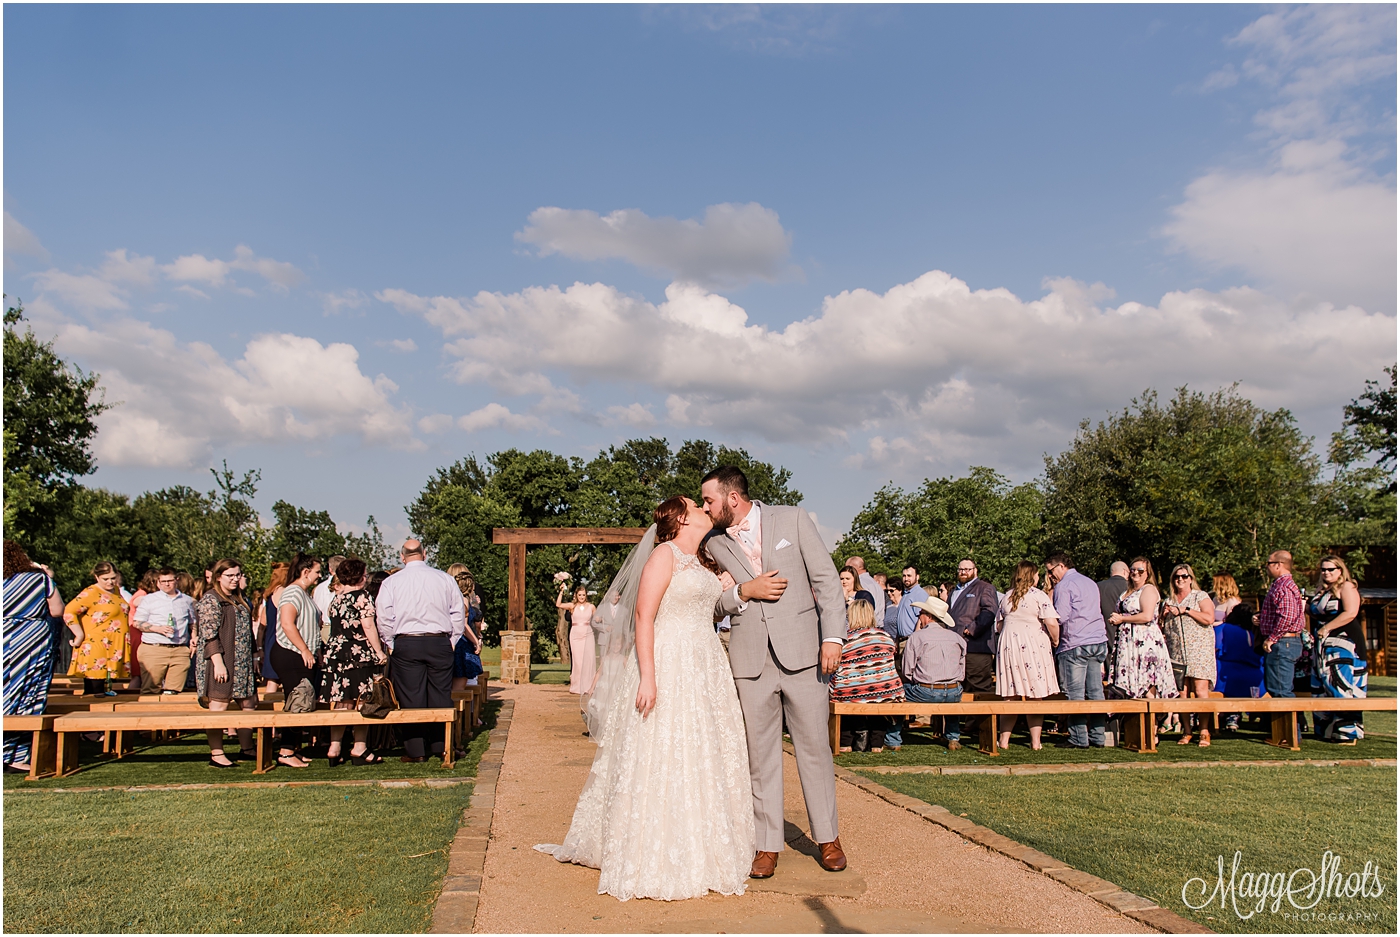 MaggShots Photography, DFW Wedding Photographer, Lucky Spur Wedding Photographer, Lucky Spur, Wedding Photographer, Justin wedding, Lucky Spur Wedding, ceremony space, venue details, ceremony details, bride and groom, first presentation, mr&mrs